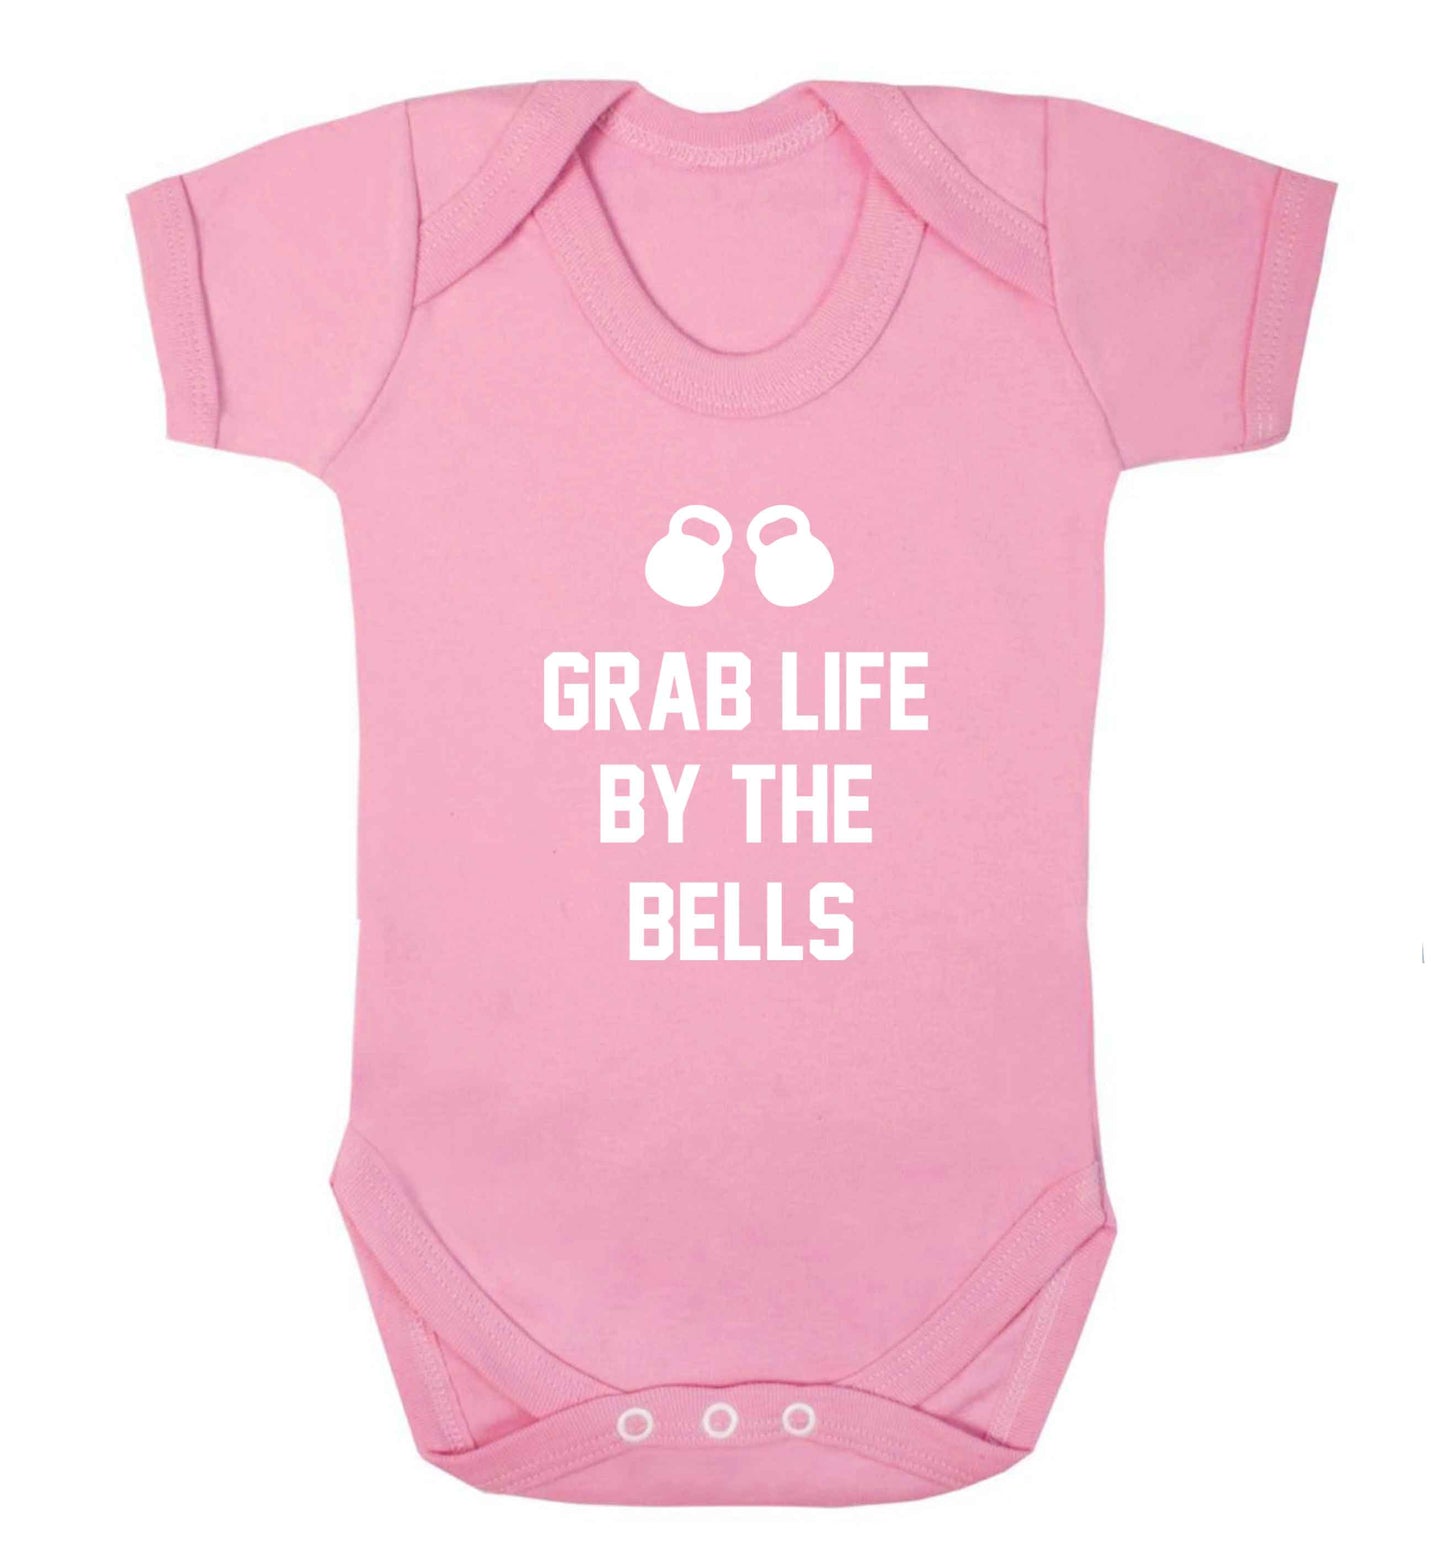 Grab life by the bells baby vest pale pink 18-24 months